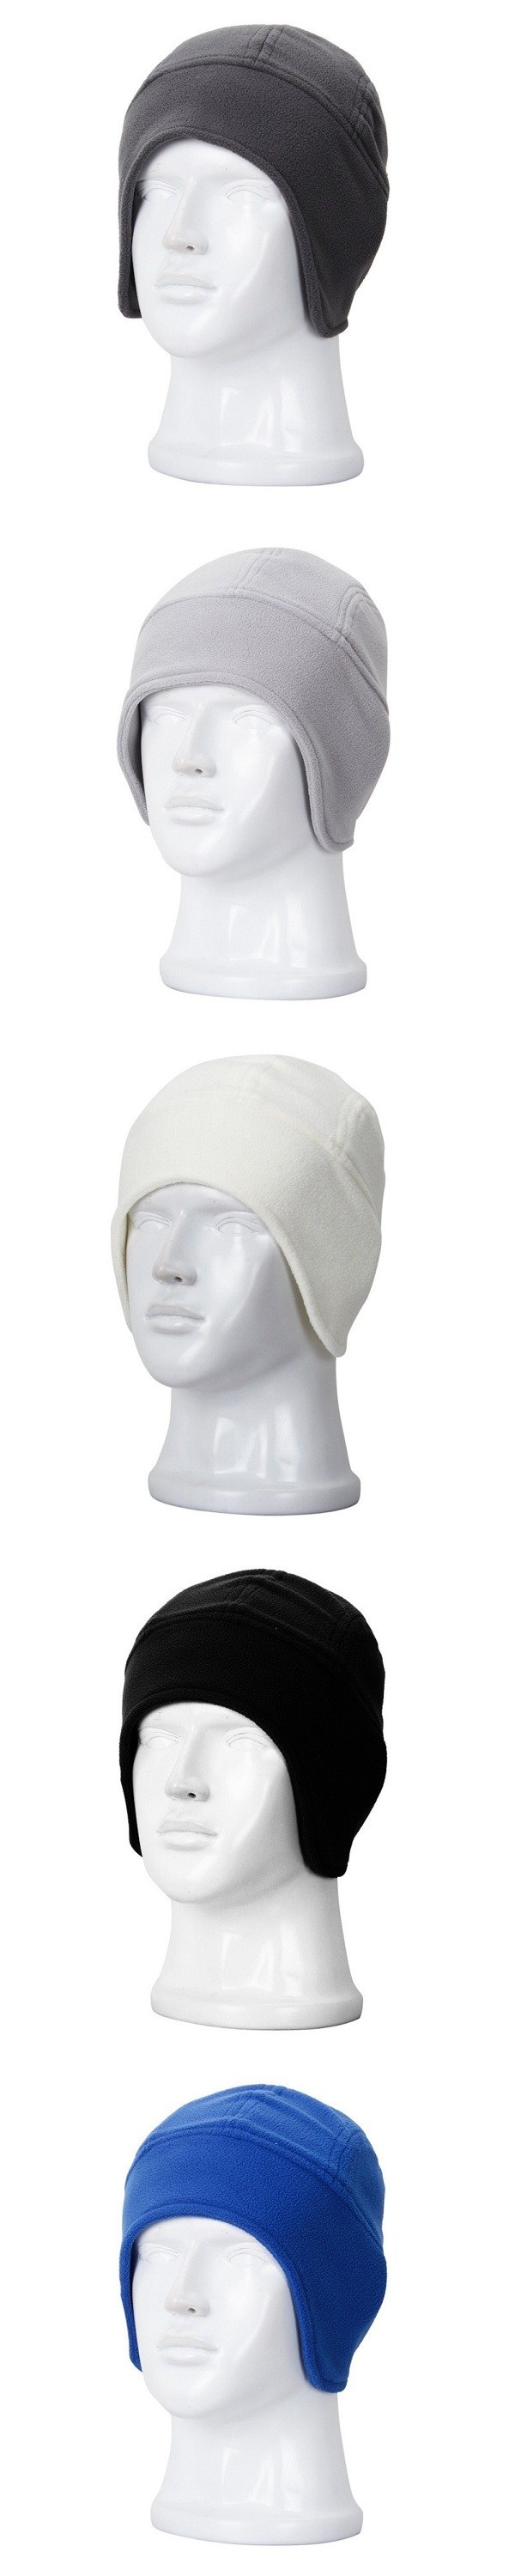 Winter-Knitted-Cap-Fleece-Thermal-Protect-Ear-Caps--Men-and-Women-Thicken-Skiing-Caps-1015610